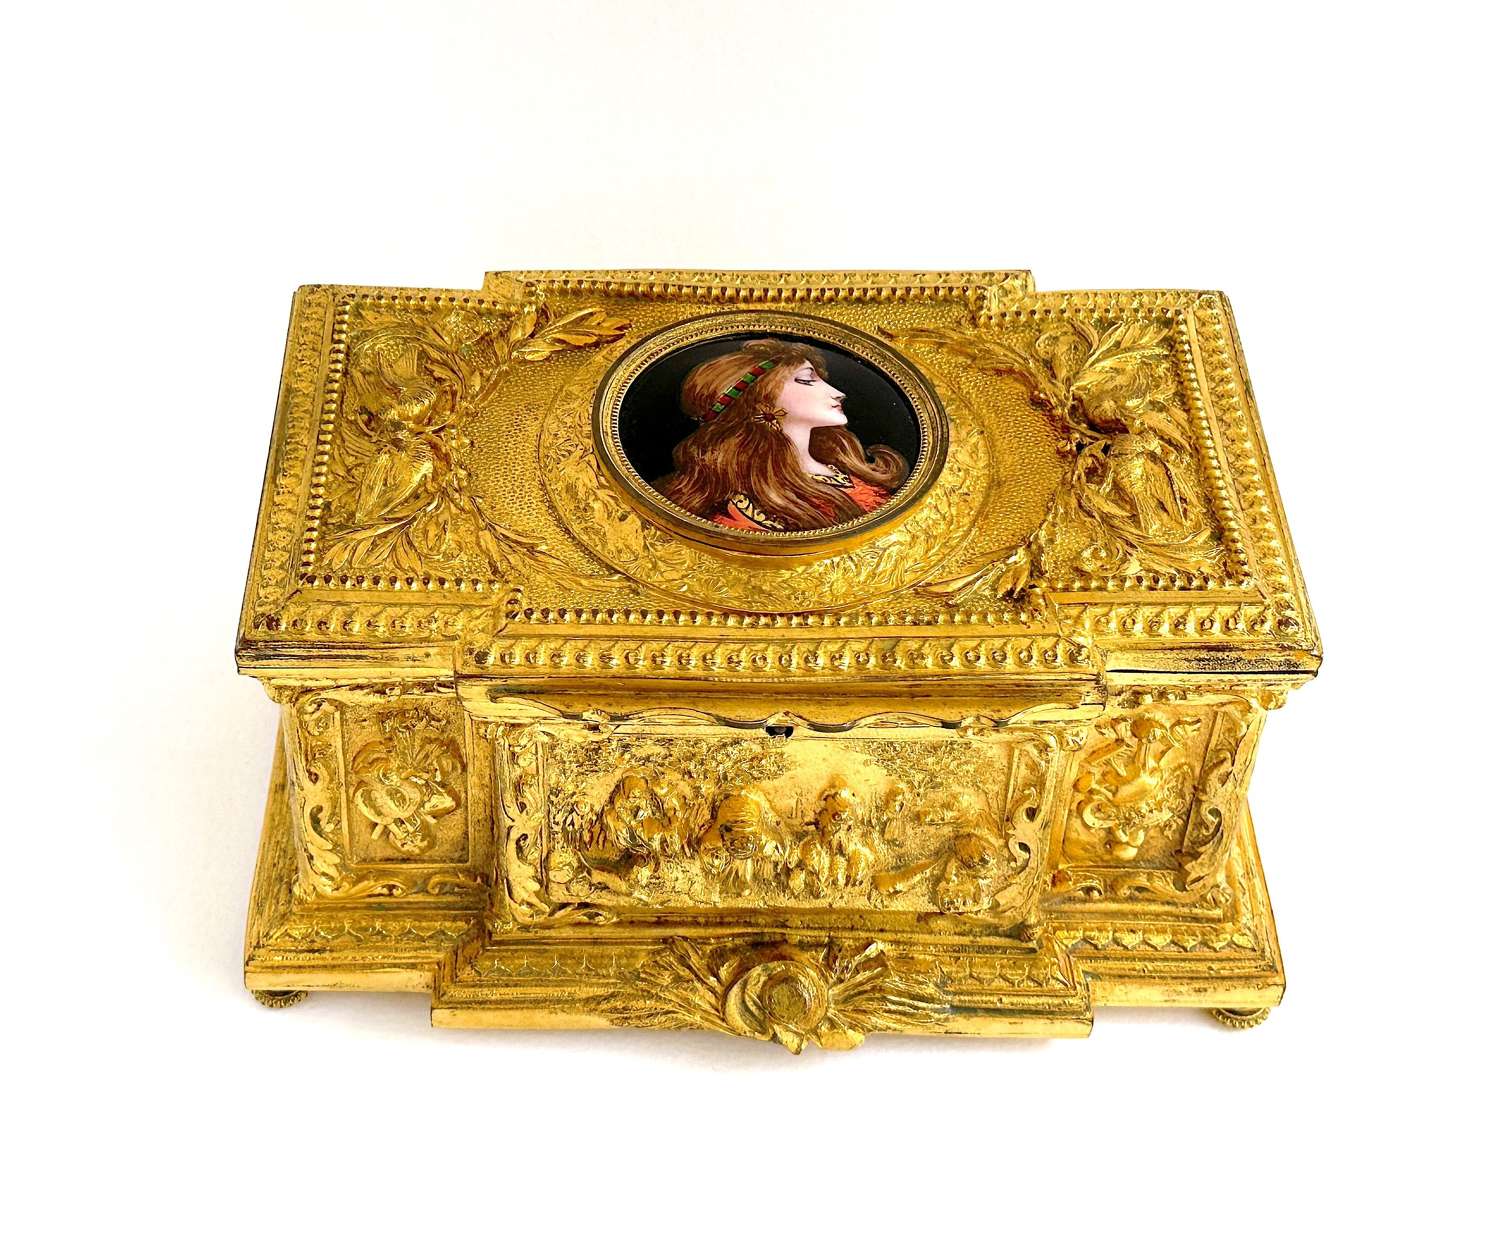 A High Quality Antique French Dore Bronze Box with a Limoges Miniature